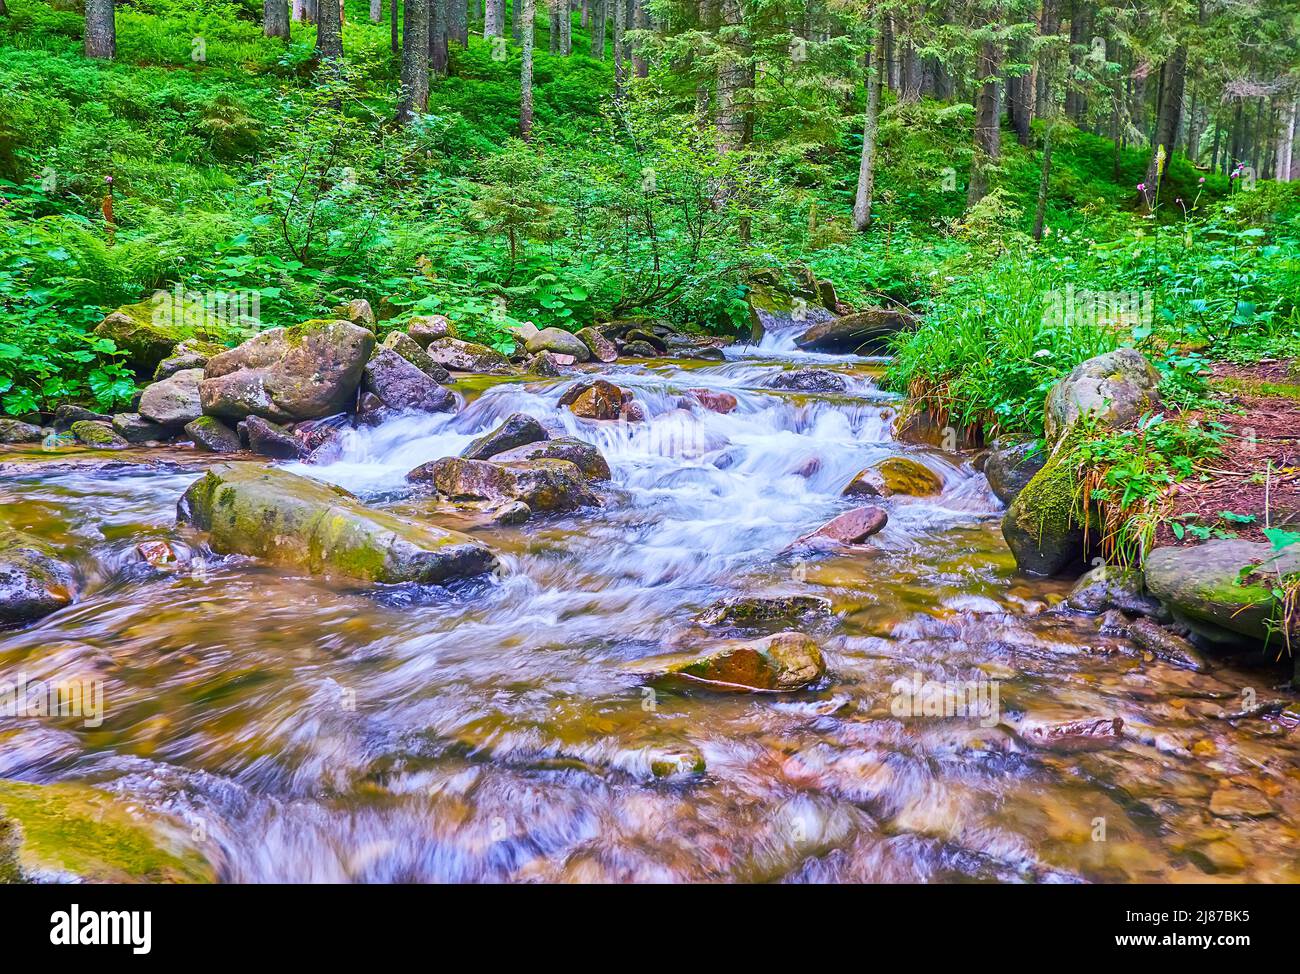 The narrow shallow creek of Prut River amid the deep forest on the slope of Mount Hoverla, Carpathians, Ukraine Stock Photo